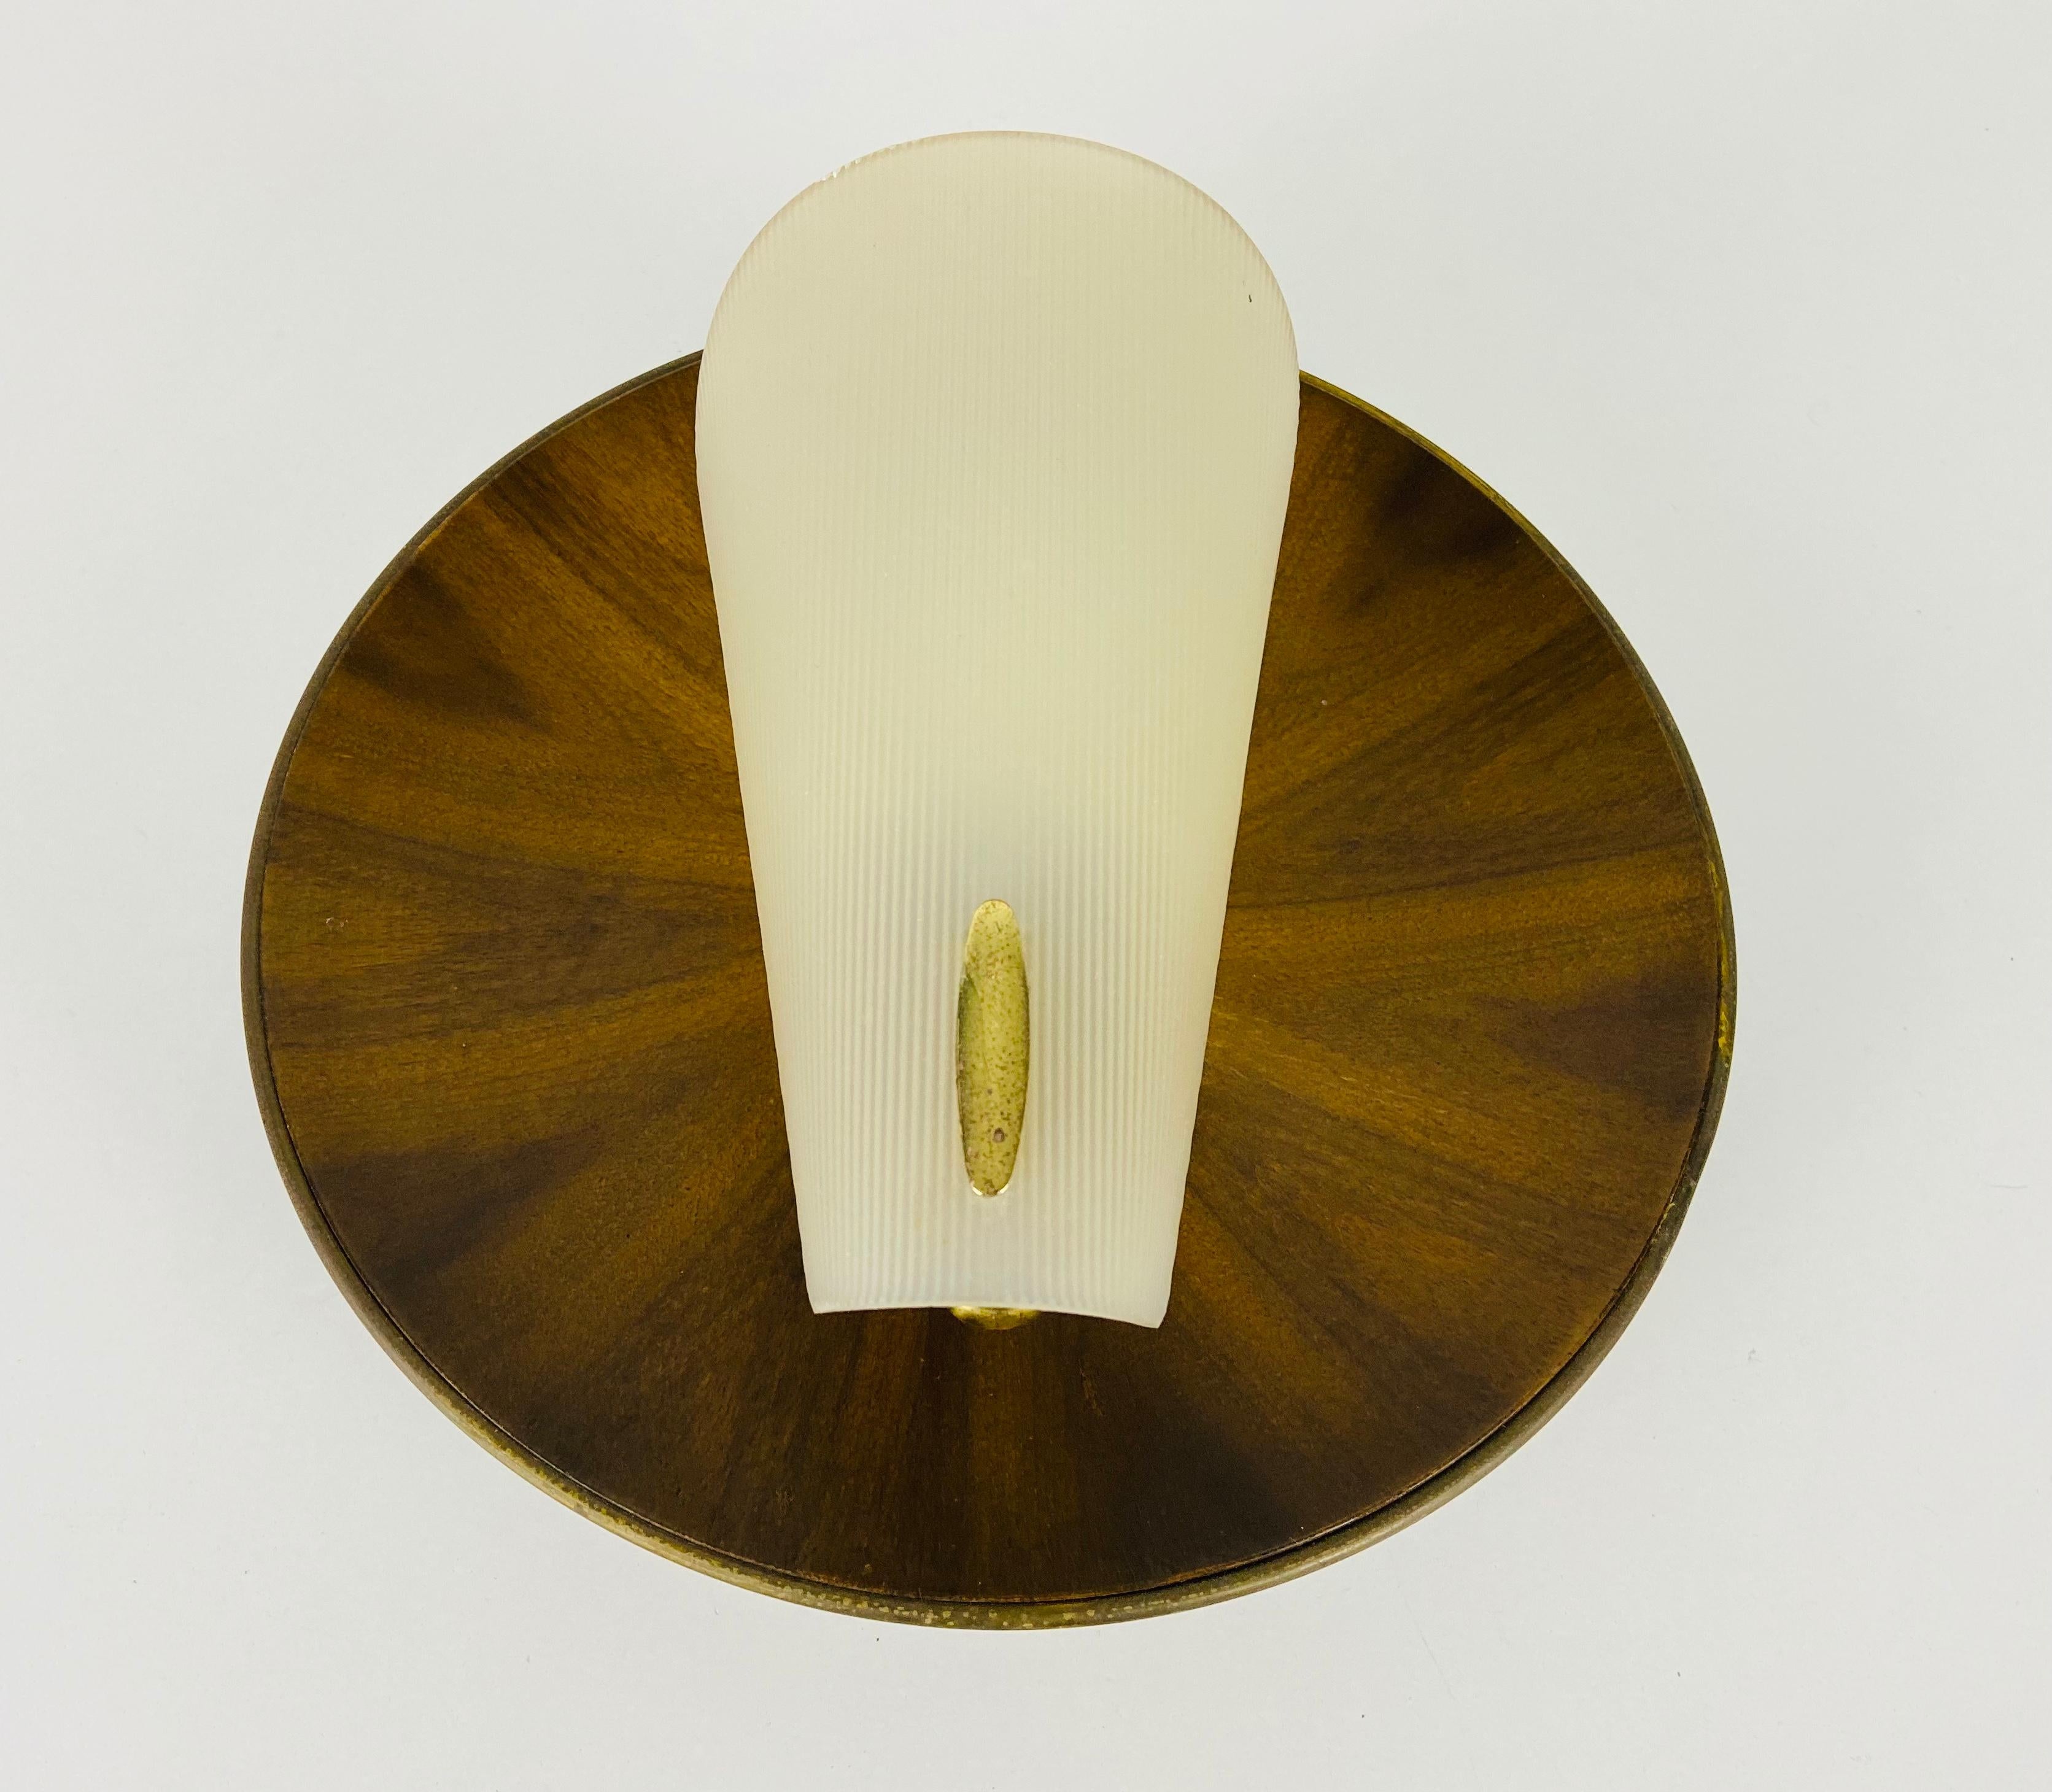 Italian wall lamp made in the 1960s in the style of Stilnovo. It is fascinating with its rare glass shape. The body of the lamp is beautiful teak wood. 

The light requires one E14 light bulbs. Works with both 120/220 V. Good vintage